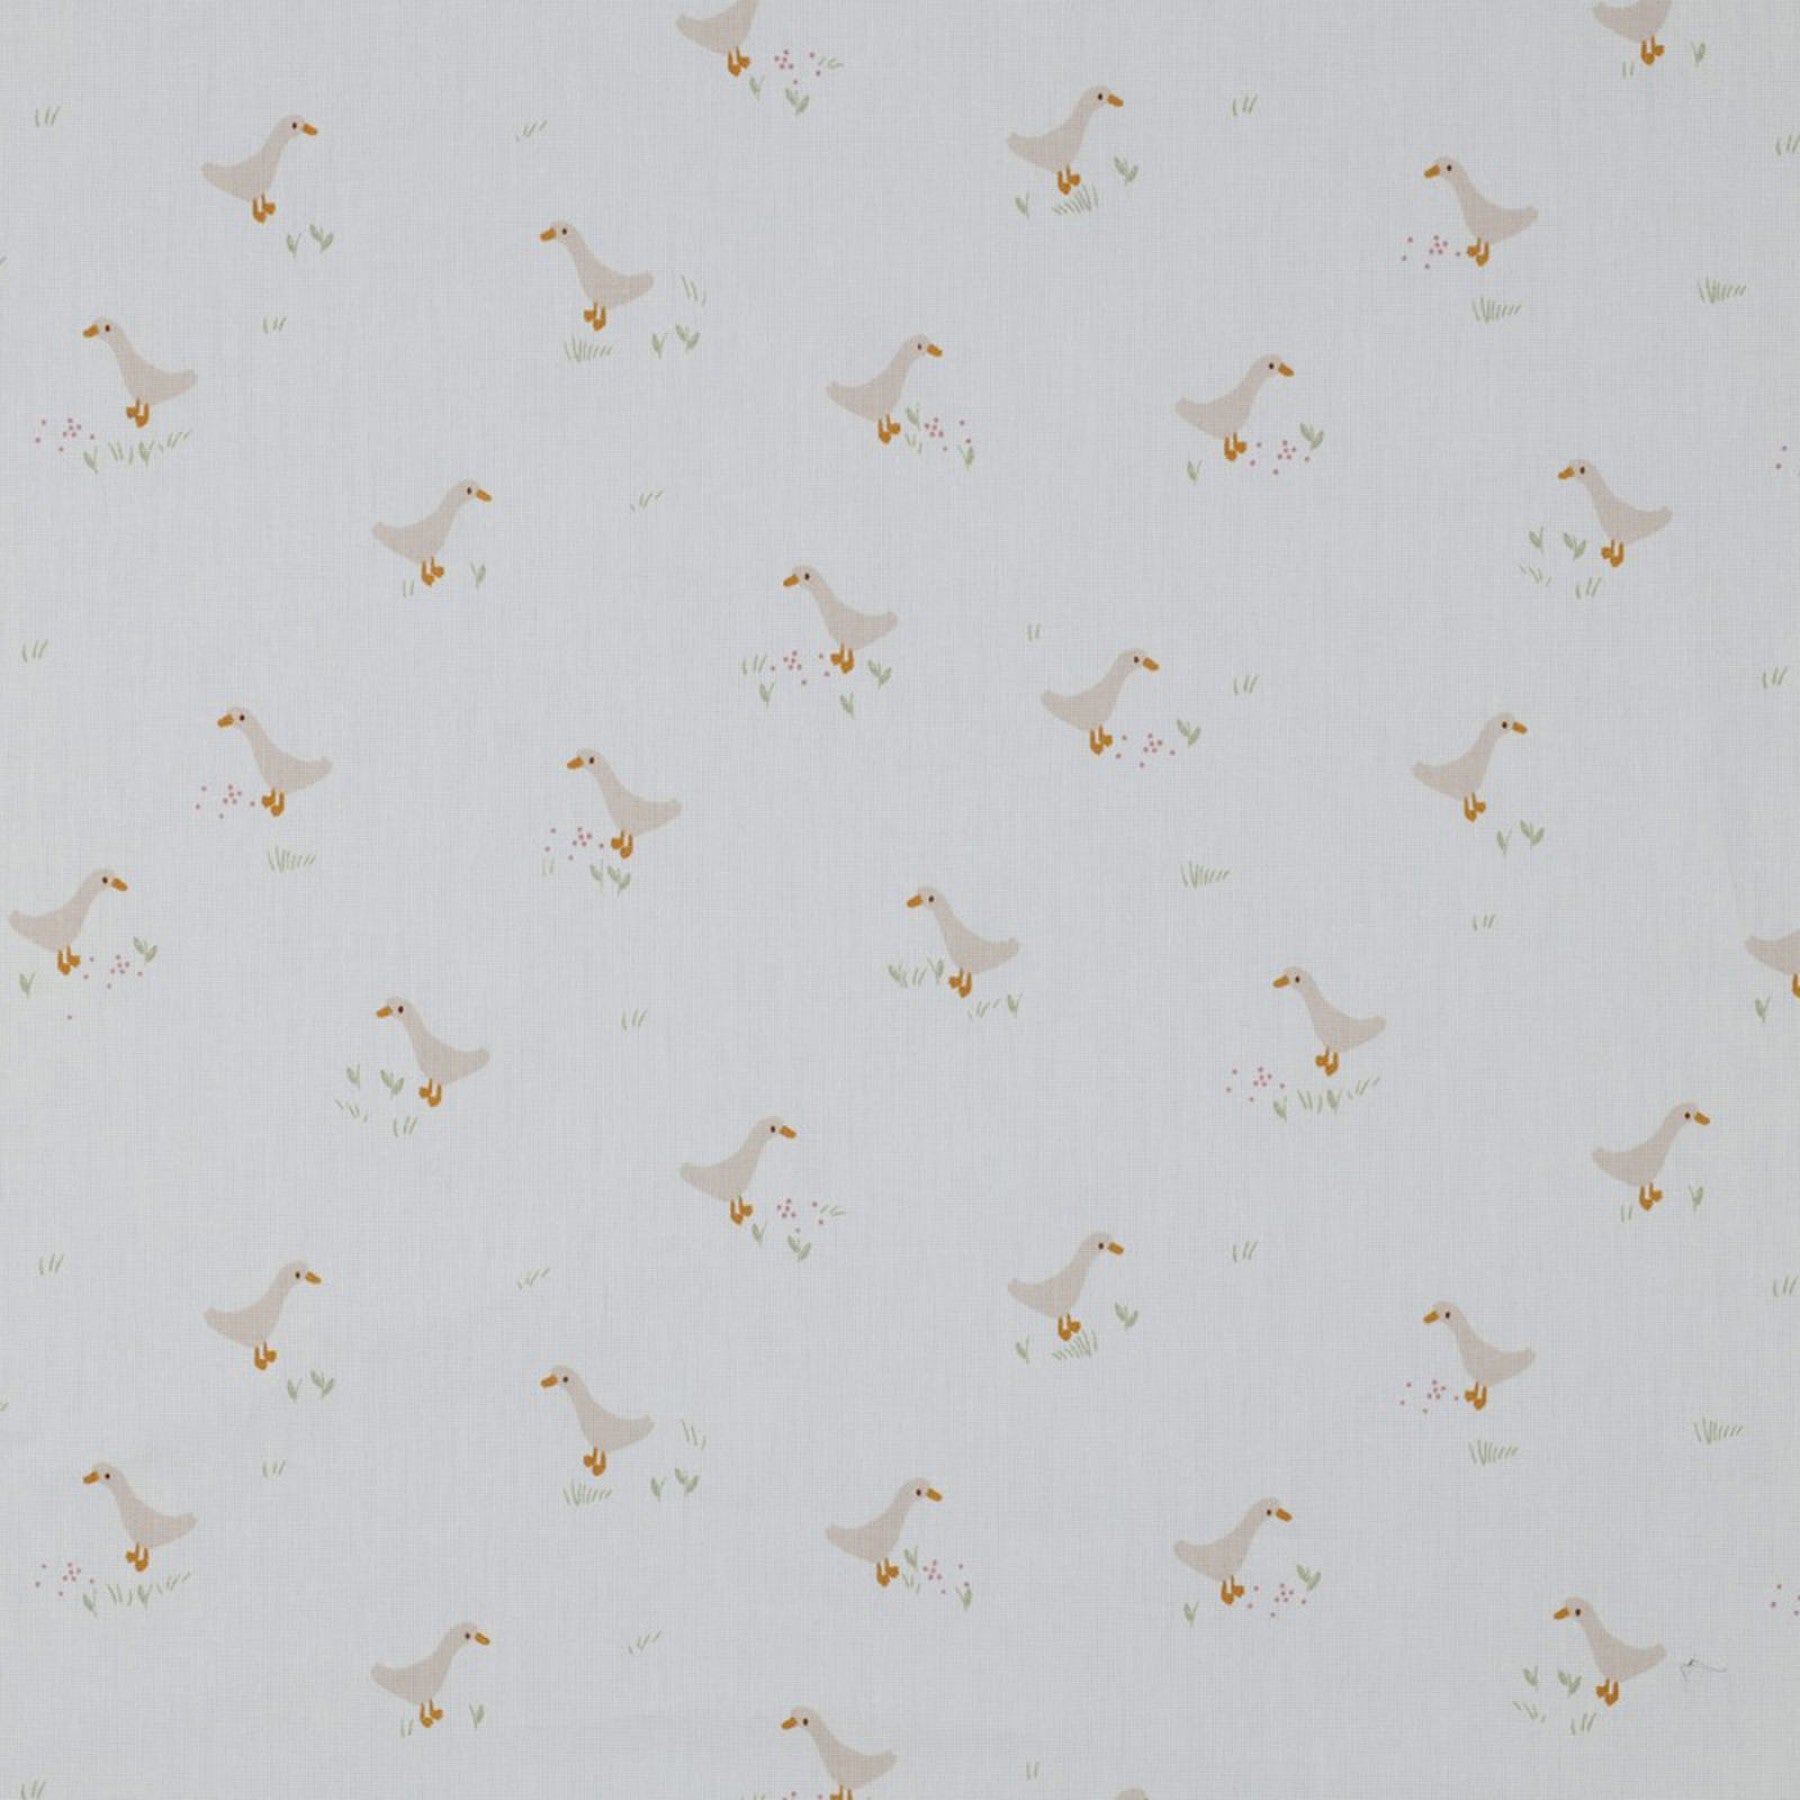 Goose and Flowers - Goose in White | Poplin Cotton